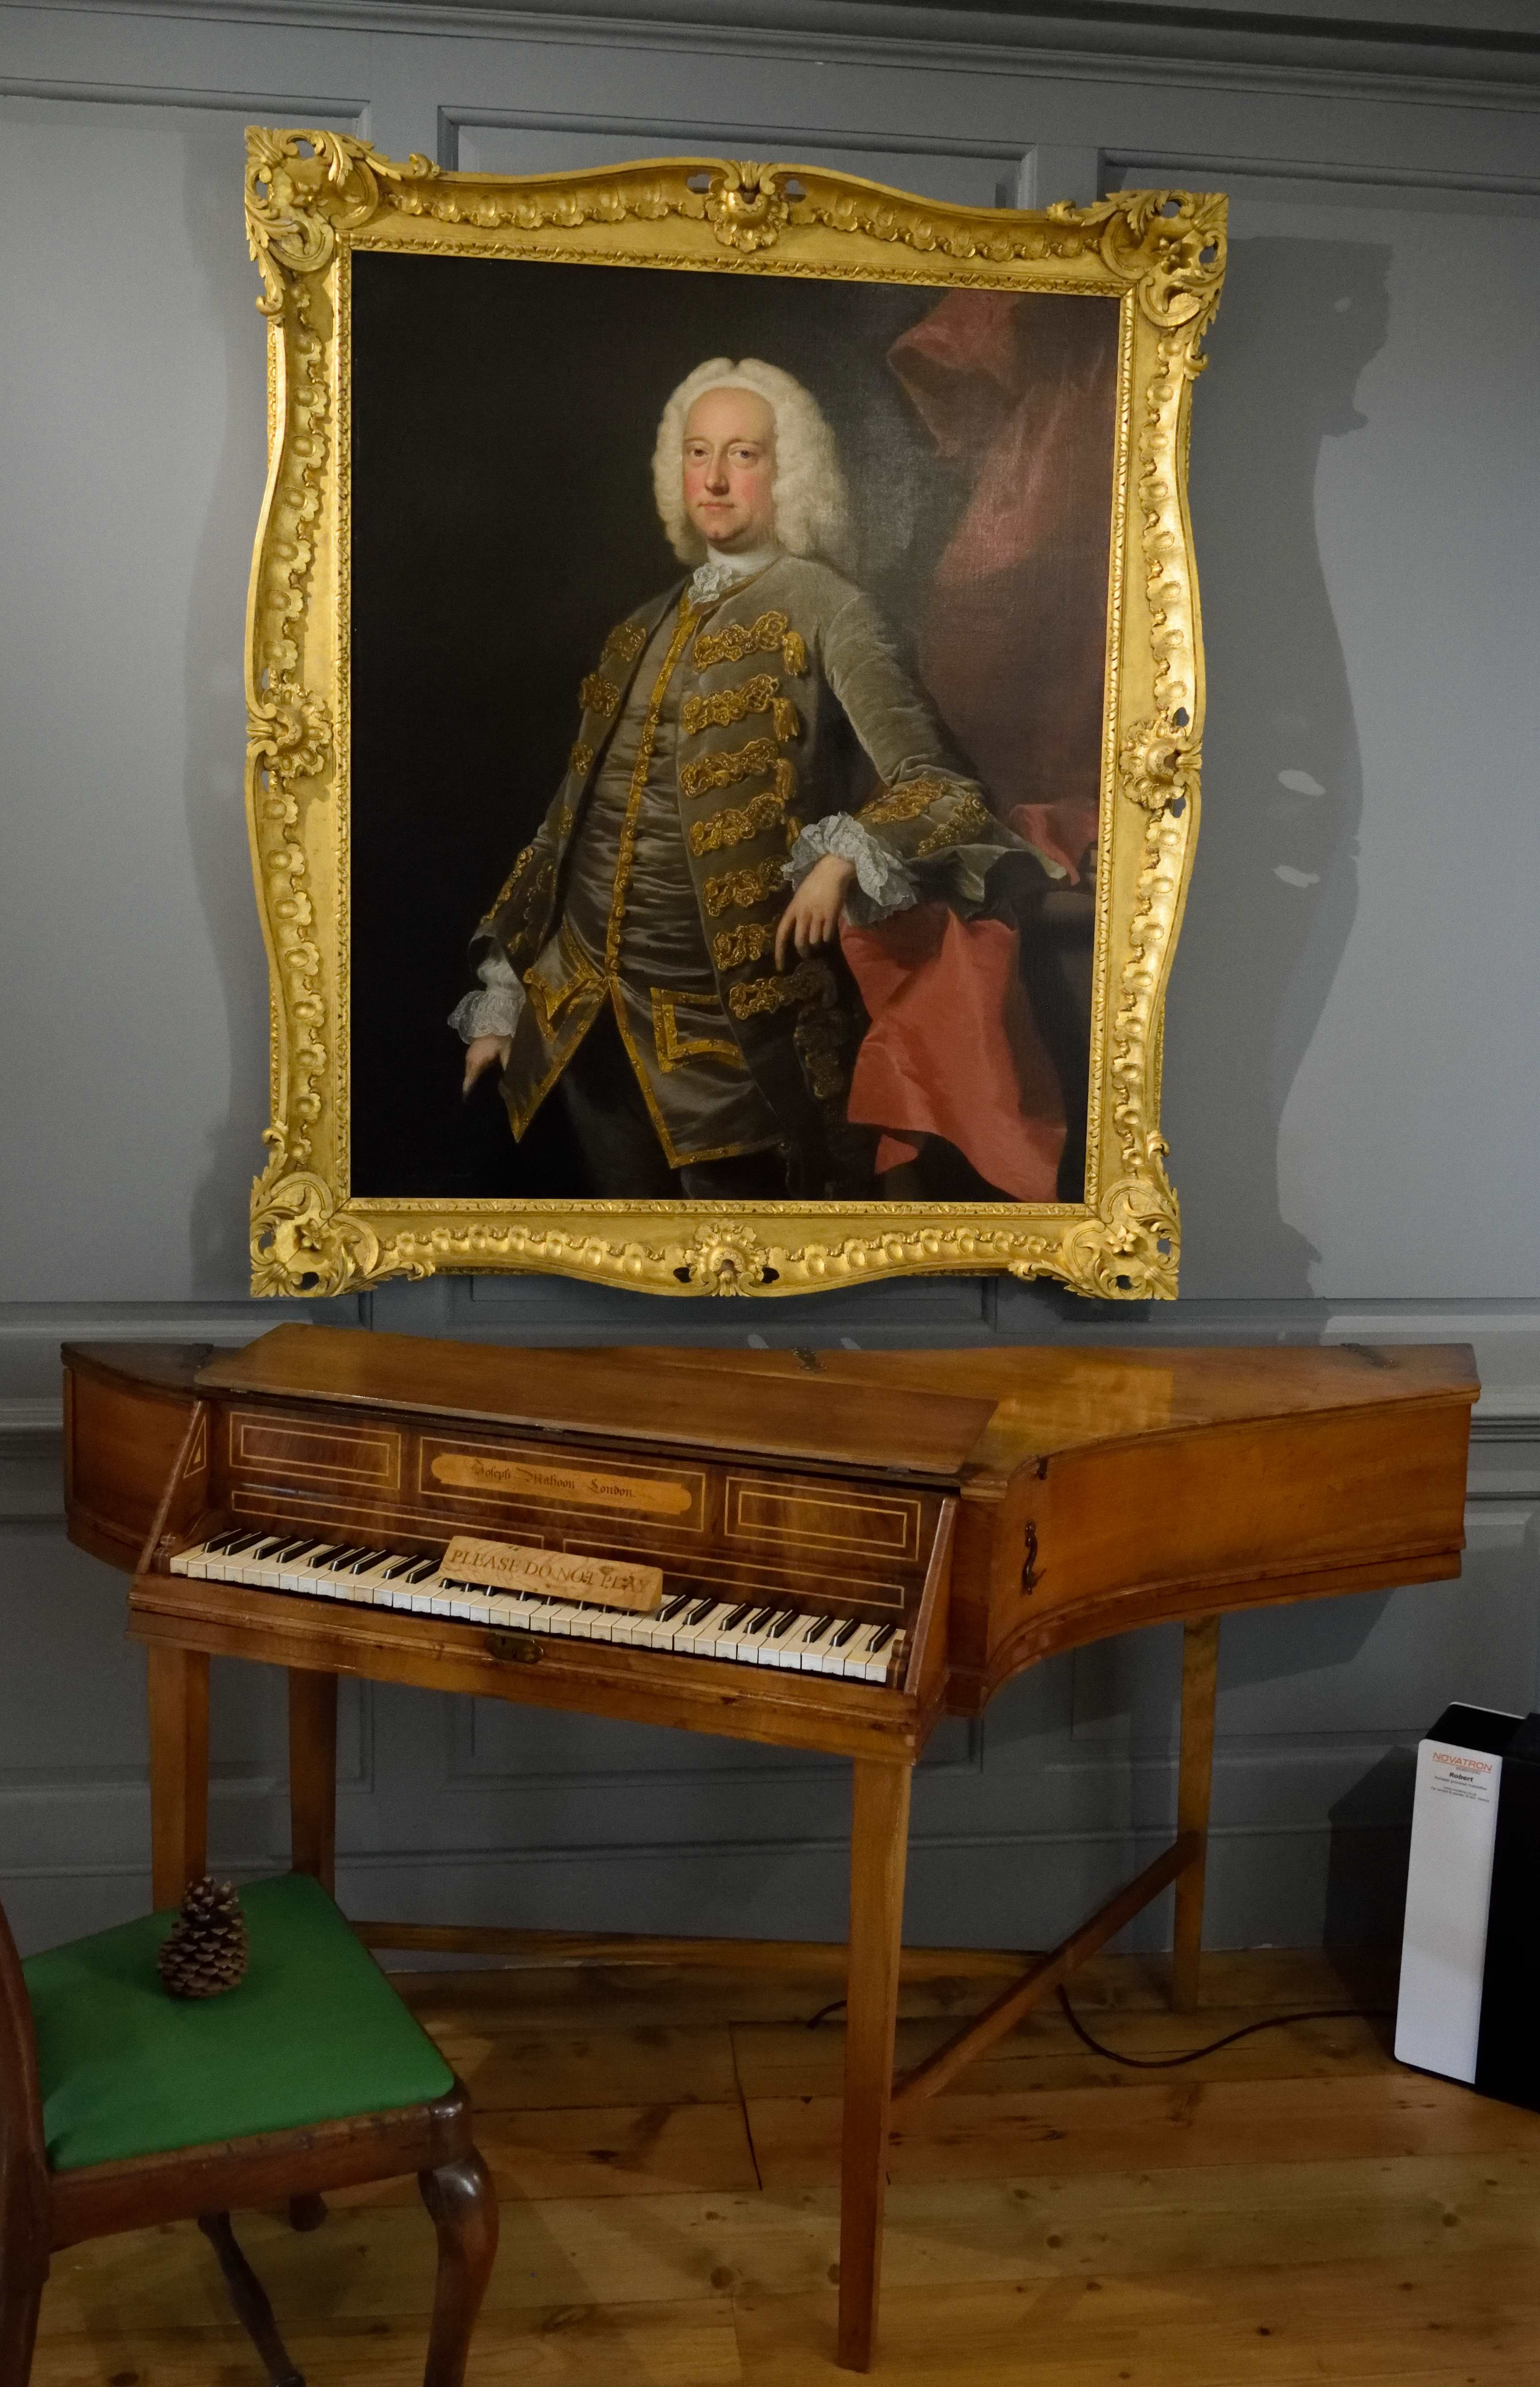 Bach and his harpsichord_032